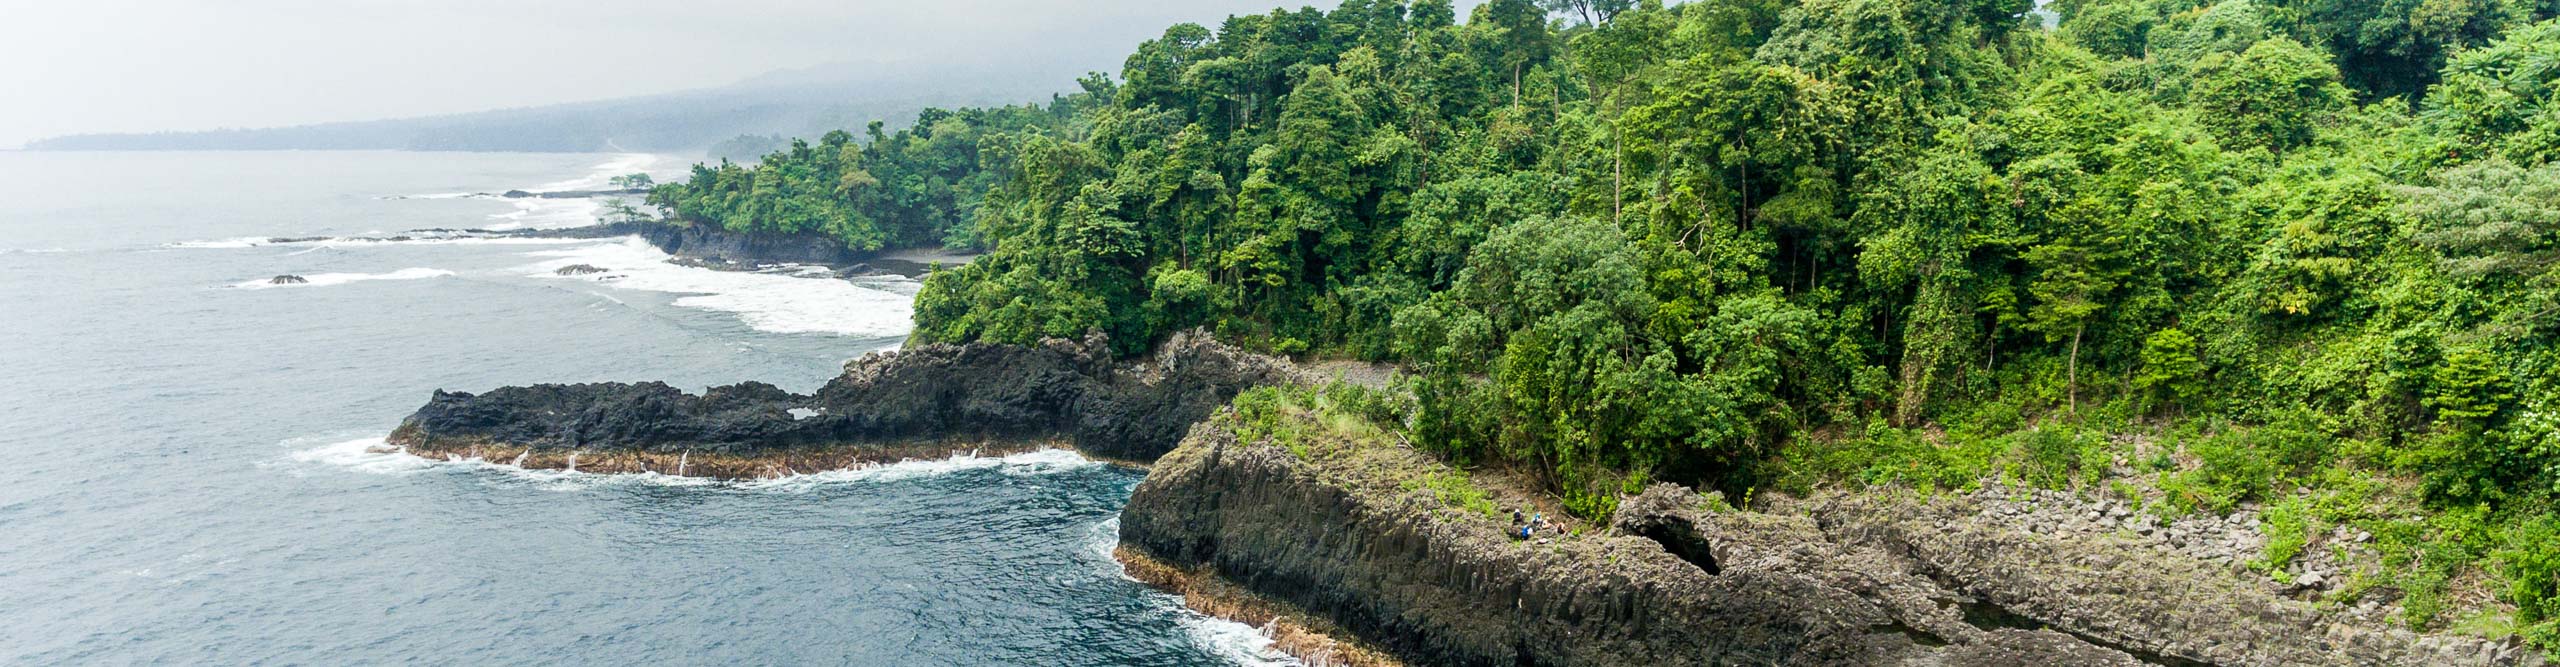 Aerial View of the ocean and jungle in Equatorial Guinea, with waves crashing on the rocks 